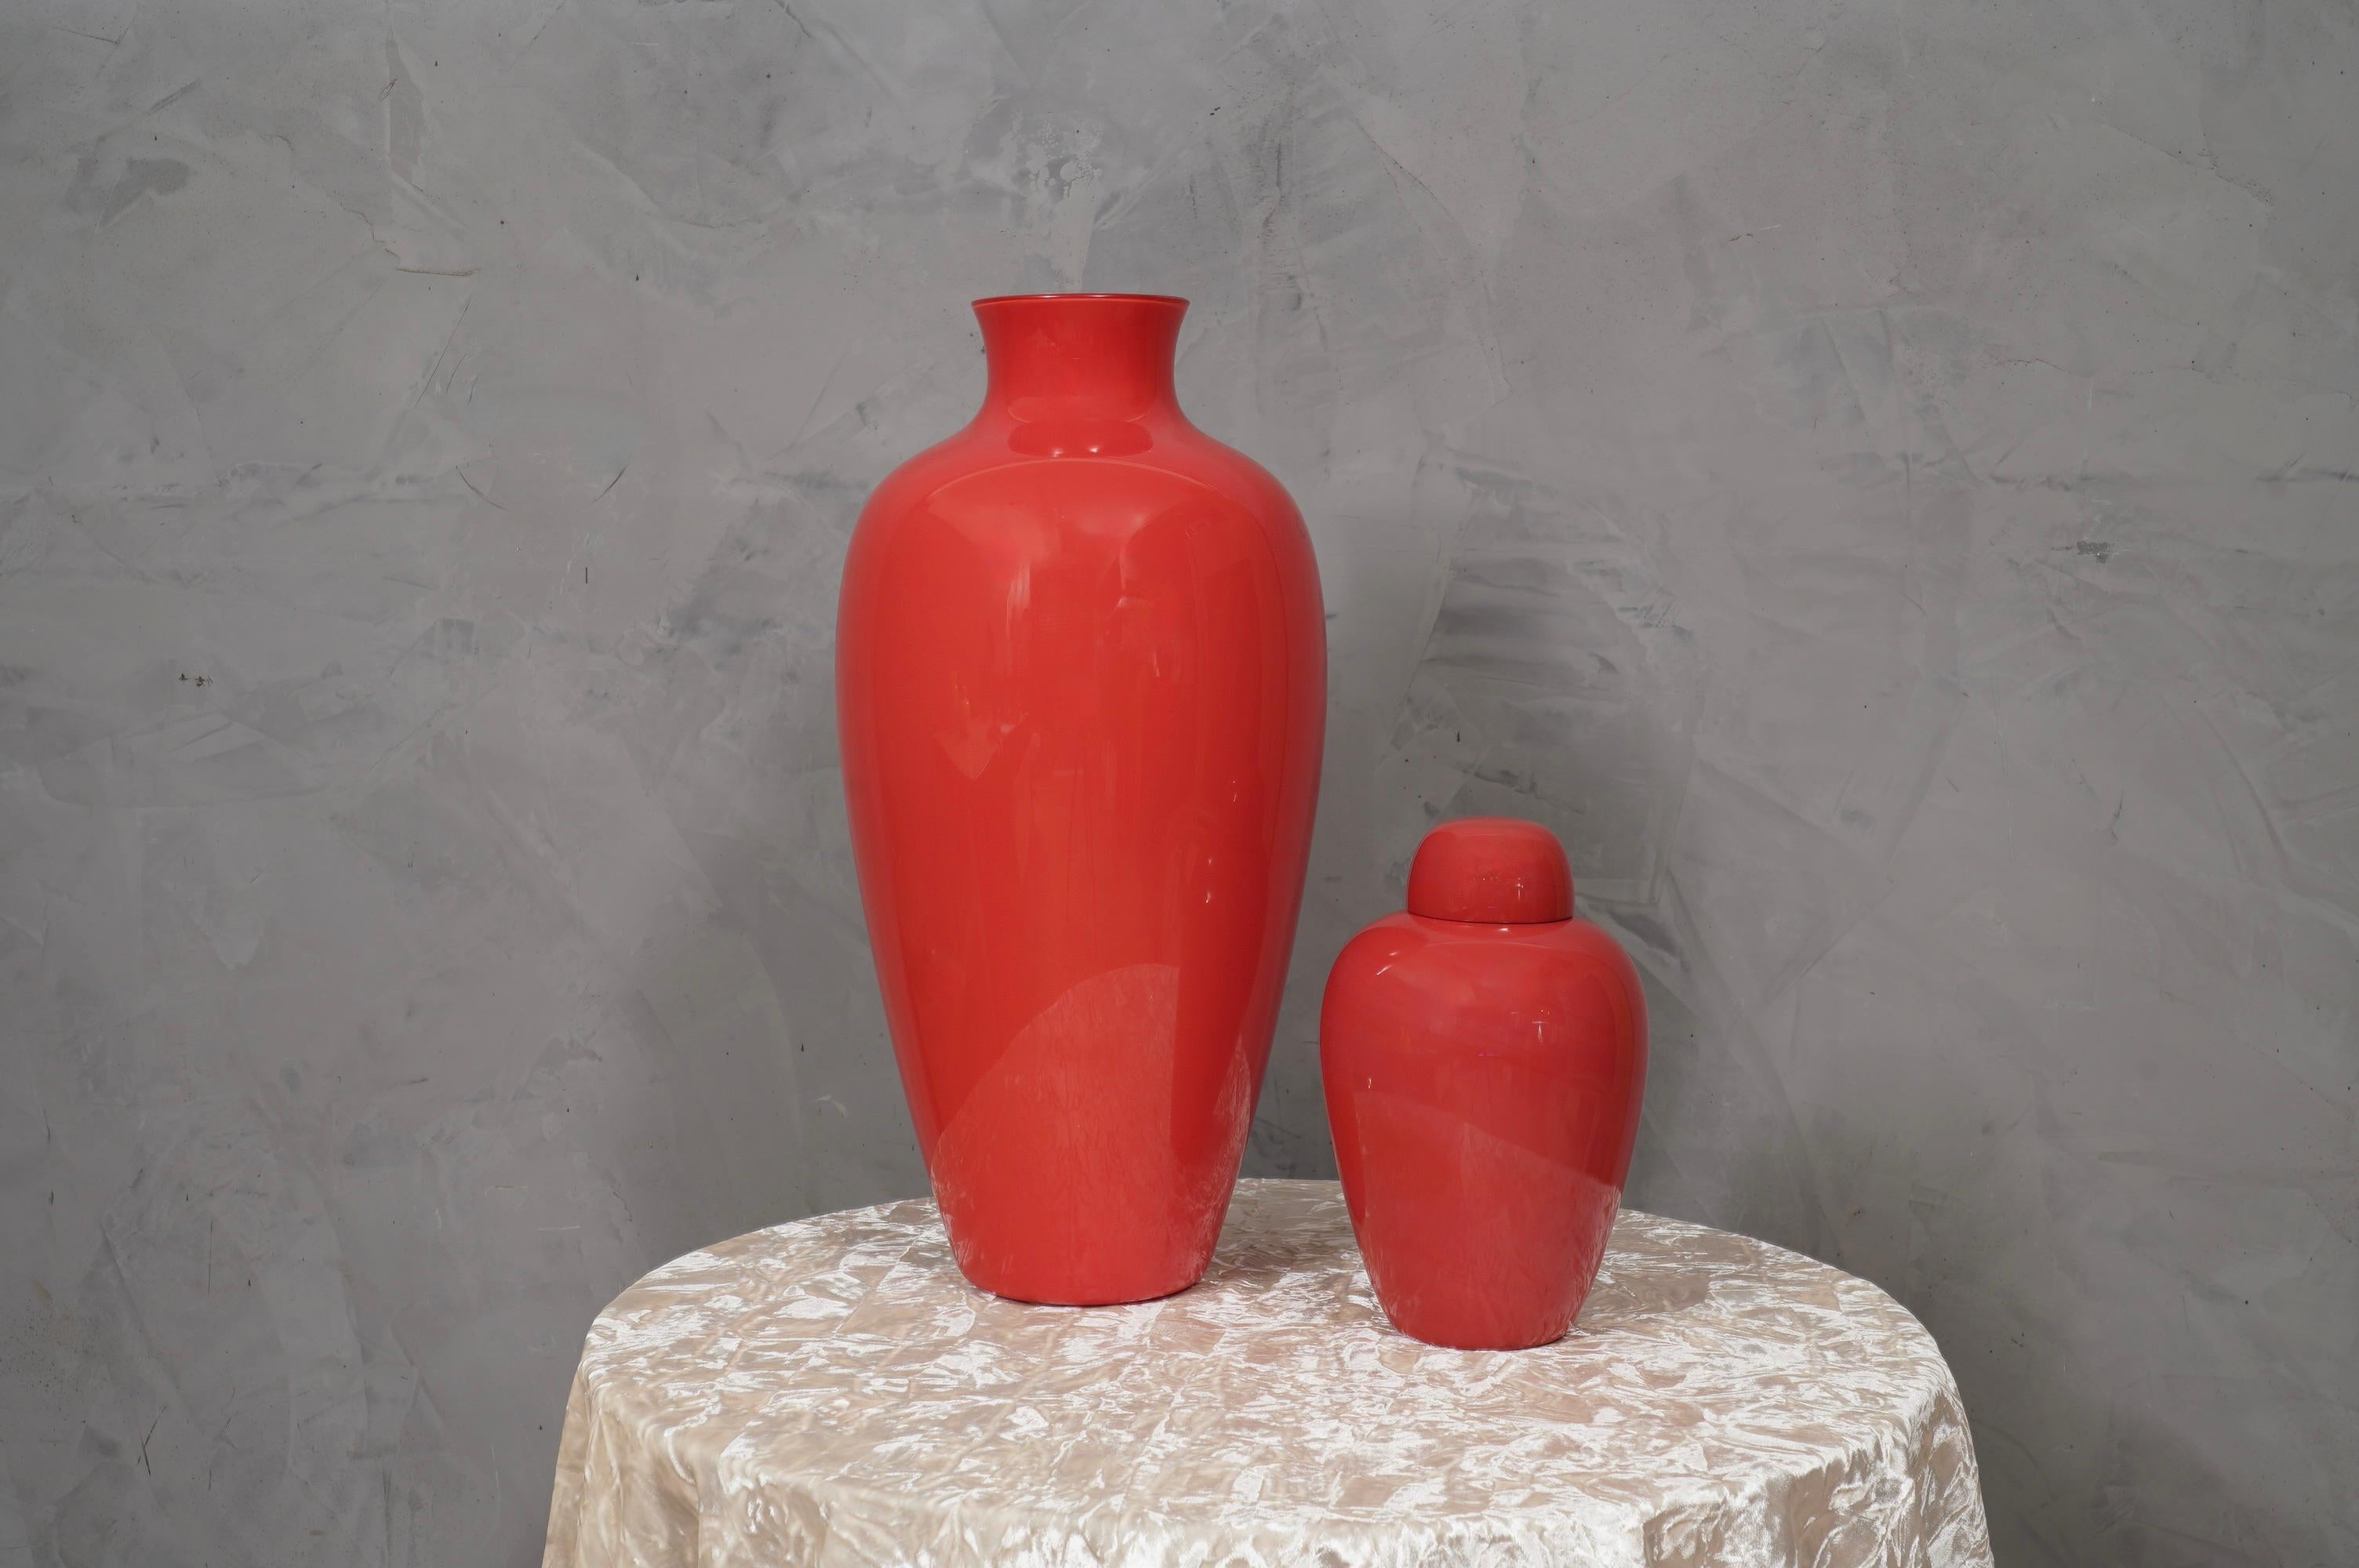 With its unique features and meticulous attention to detail, this object is a testament to Tobia Scarpa's innovative vision and artistic sensibility.

The small jar is in coral opal Murano glass, meticulously manufactured by Venini, vase with lid